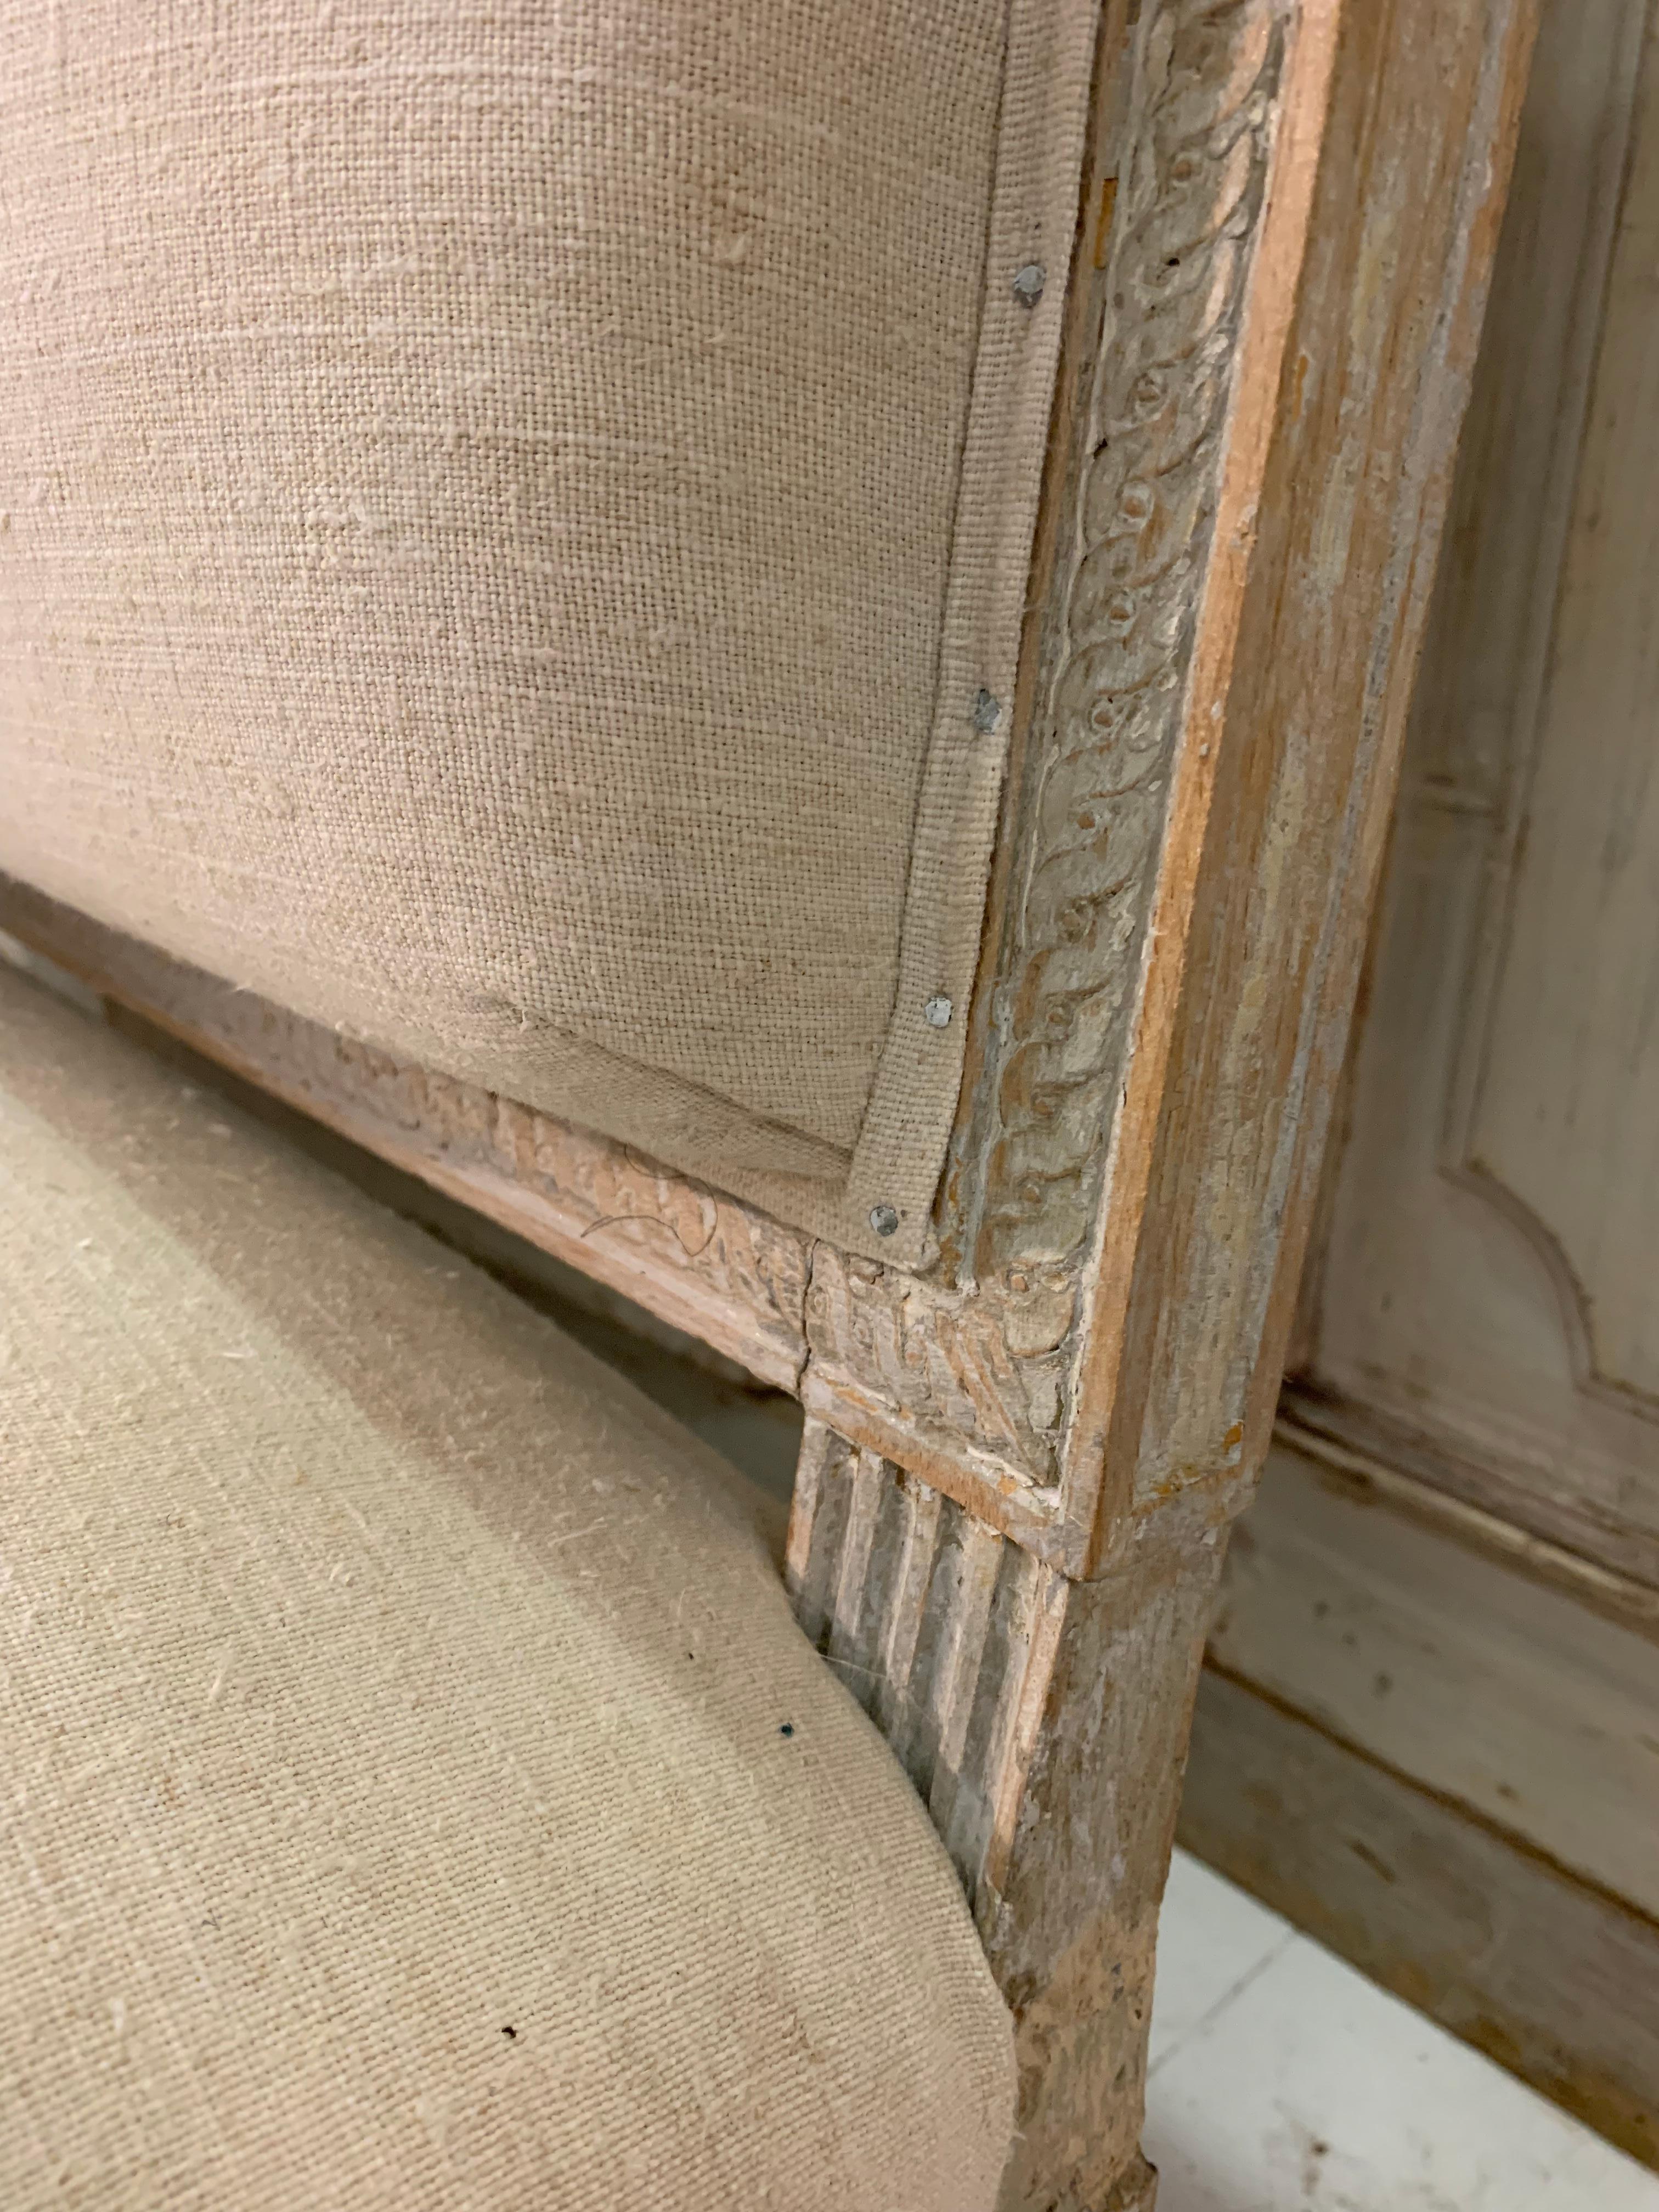 Lovely Swedish circa 18th century hand-scraped to the original paint upholstered Gustavian sofa.
The decoration to the wood is classical and it's been reupholstered in a neutral vintage French linen which compliments the sofa well.

A comfortable